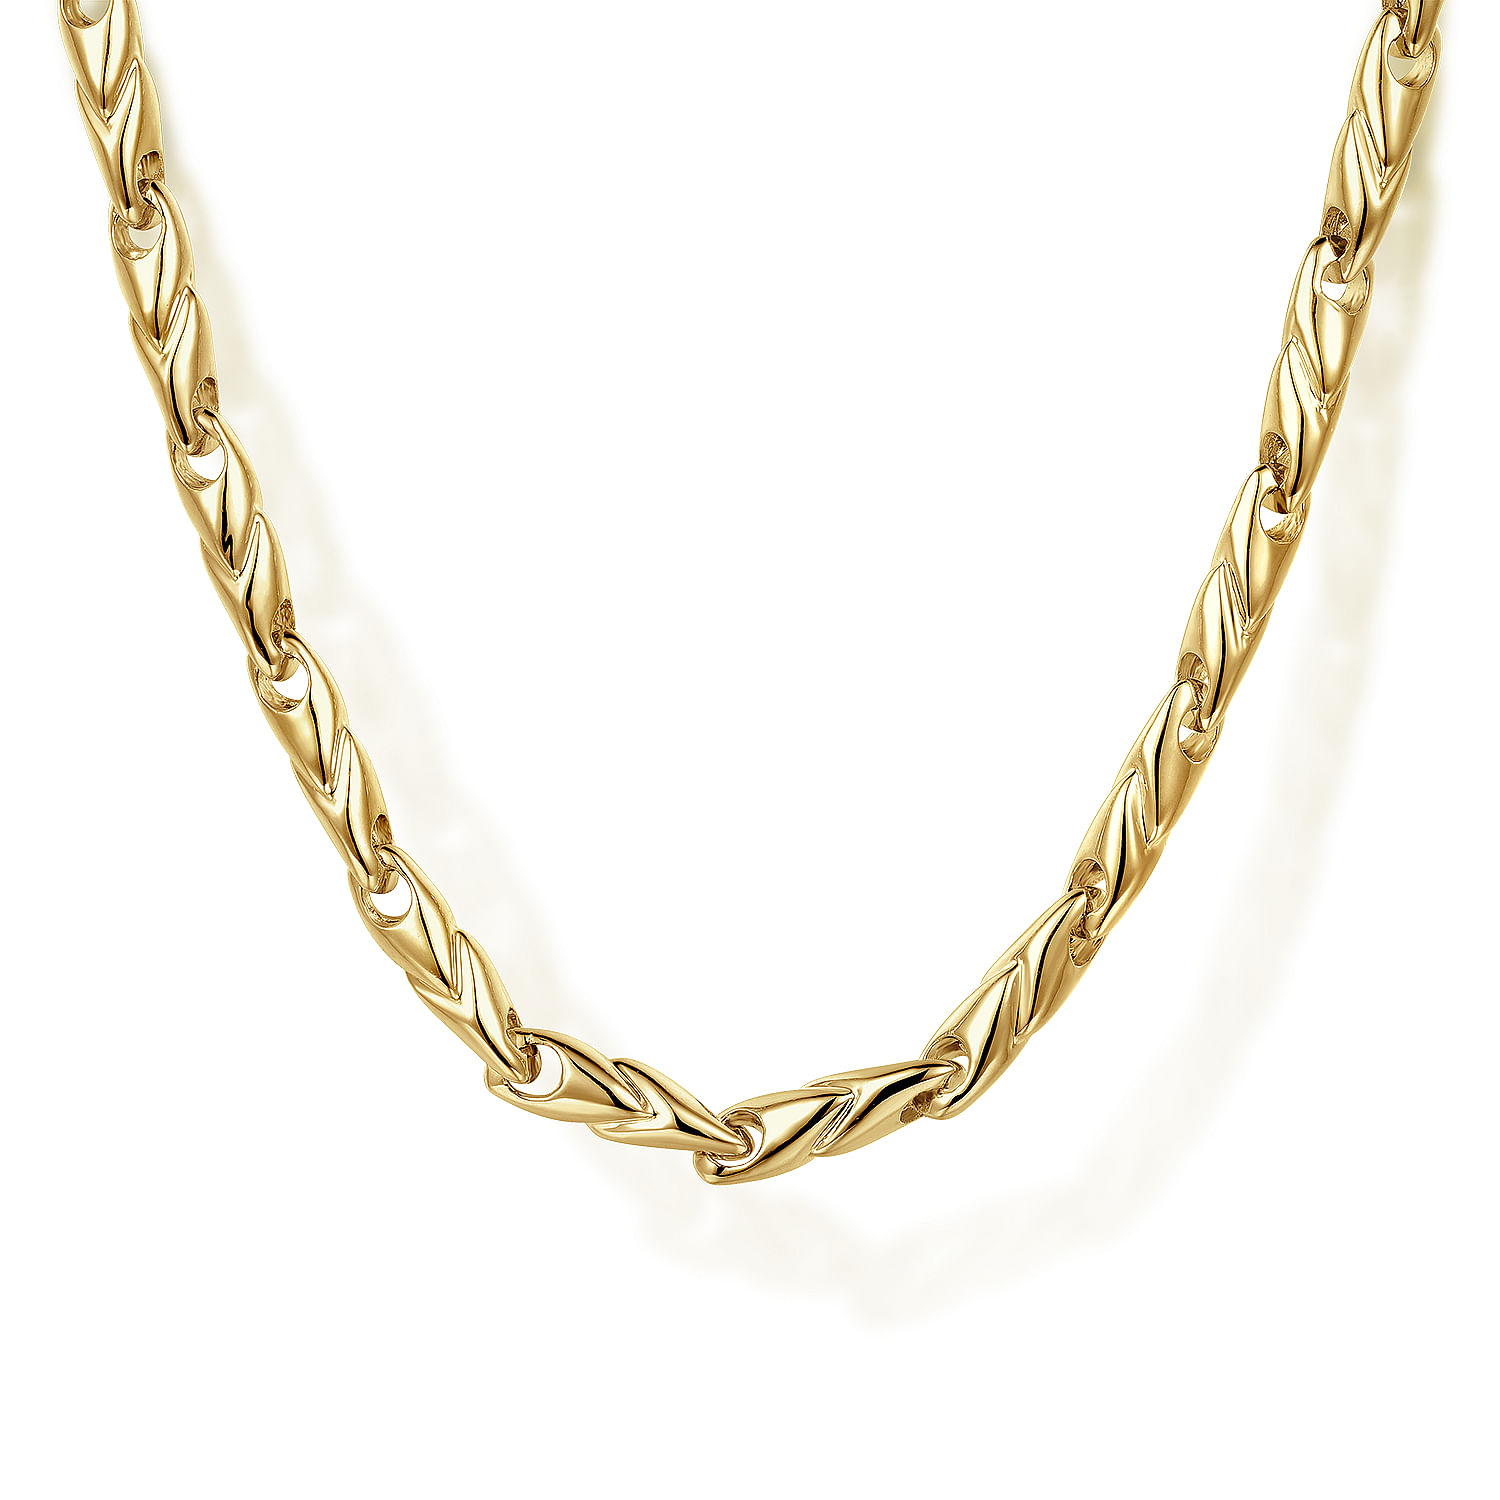 22 Inch 14K Yellow Gold Men's Chain Necklace